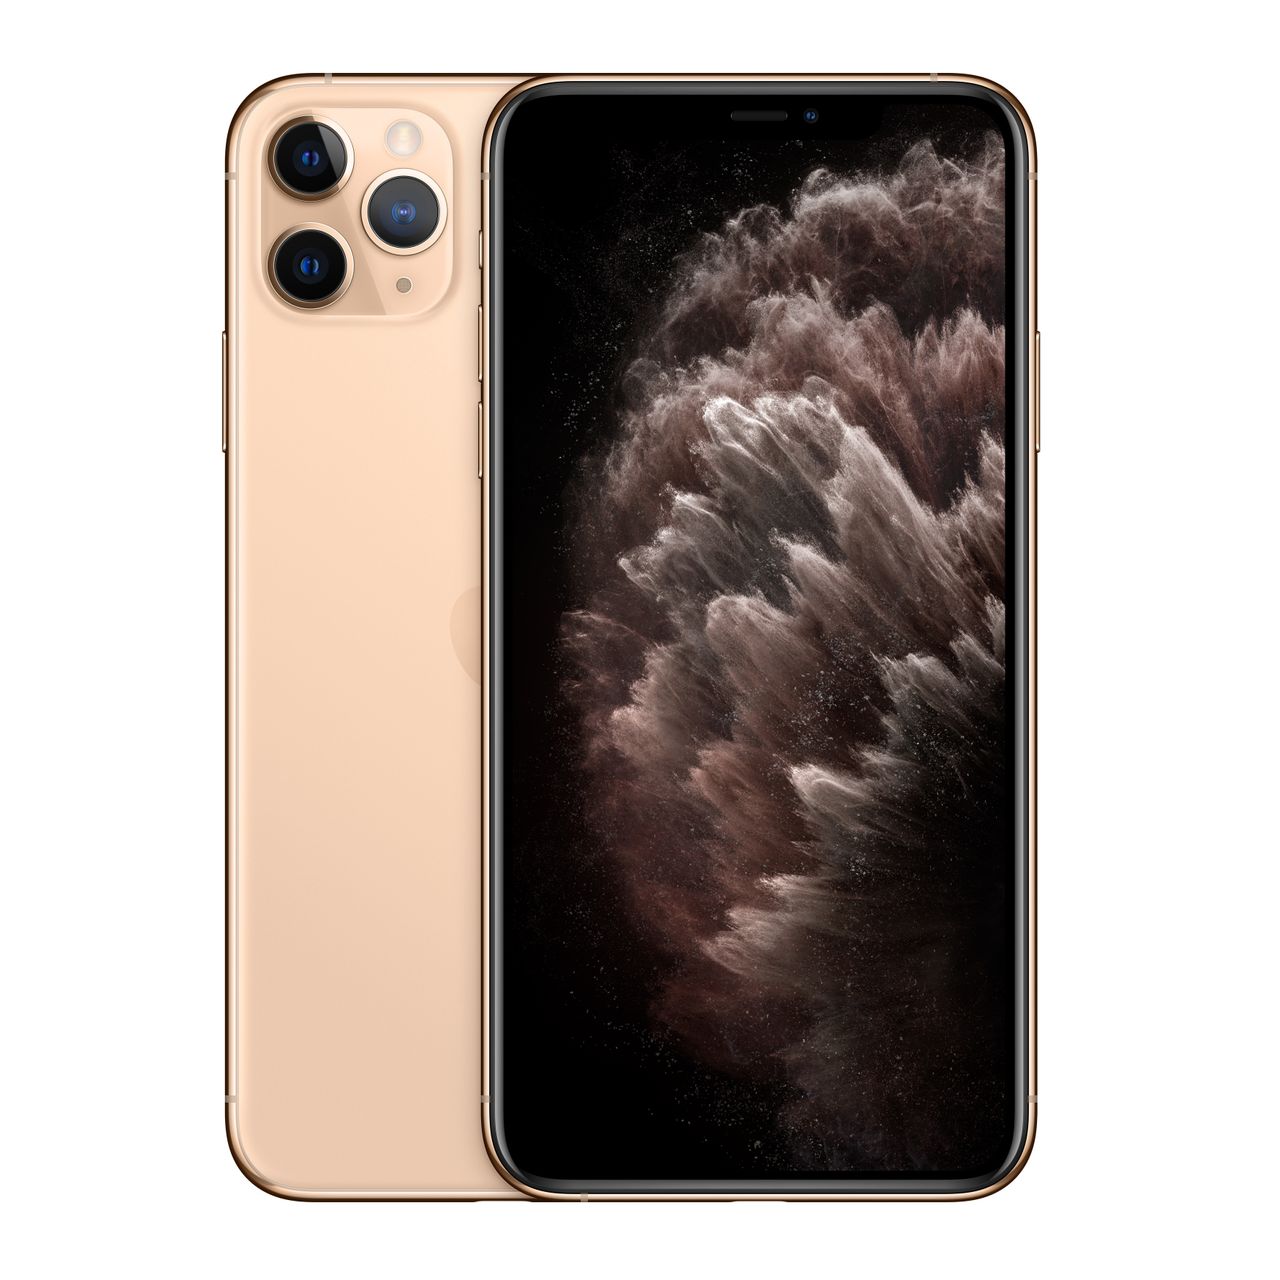 Apple iPhone 11 Pro Max 256GB in Gold Review